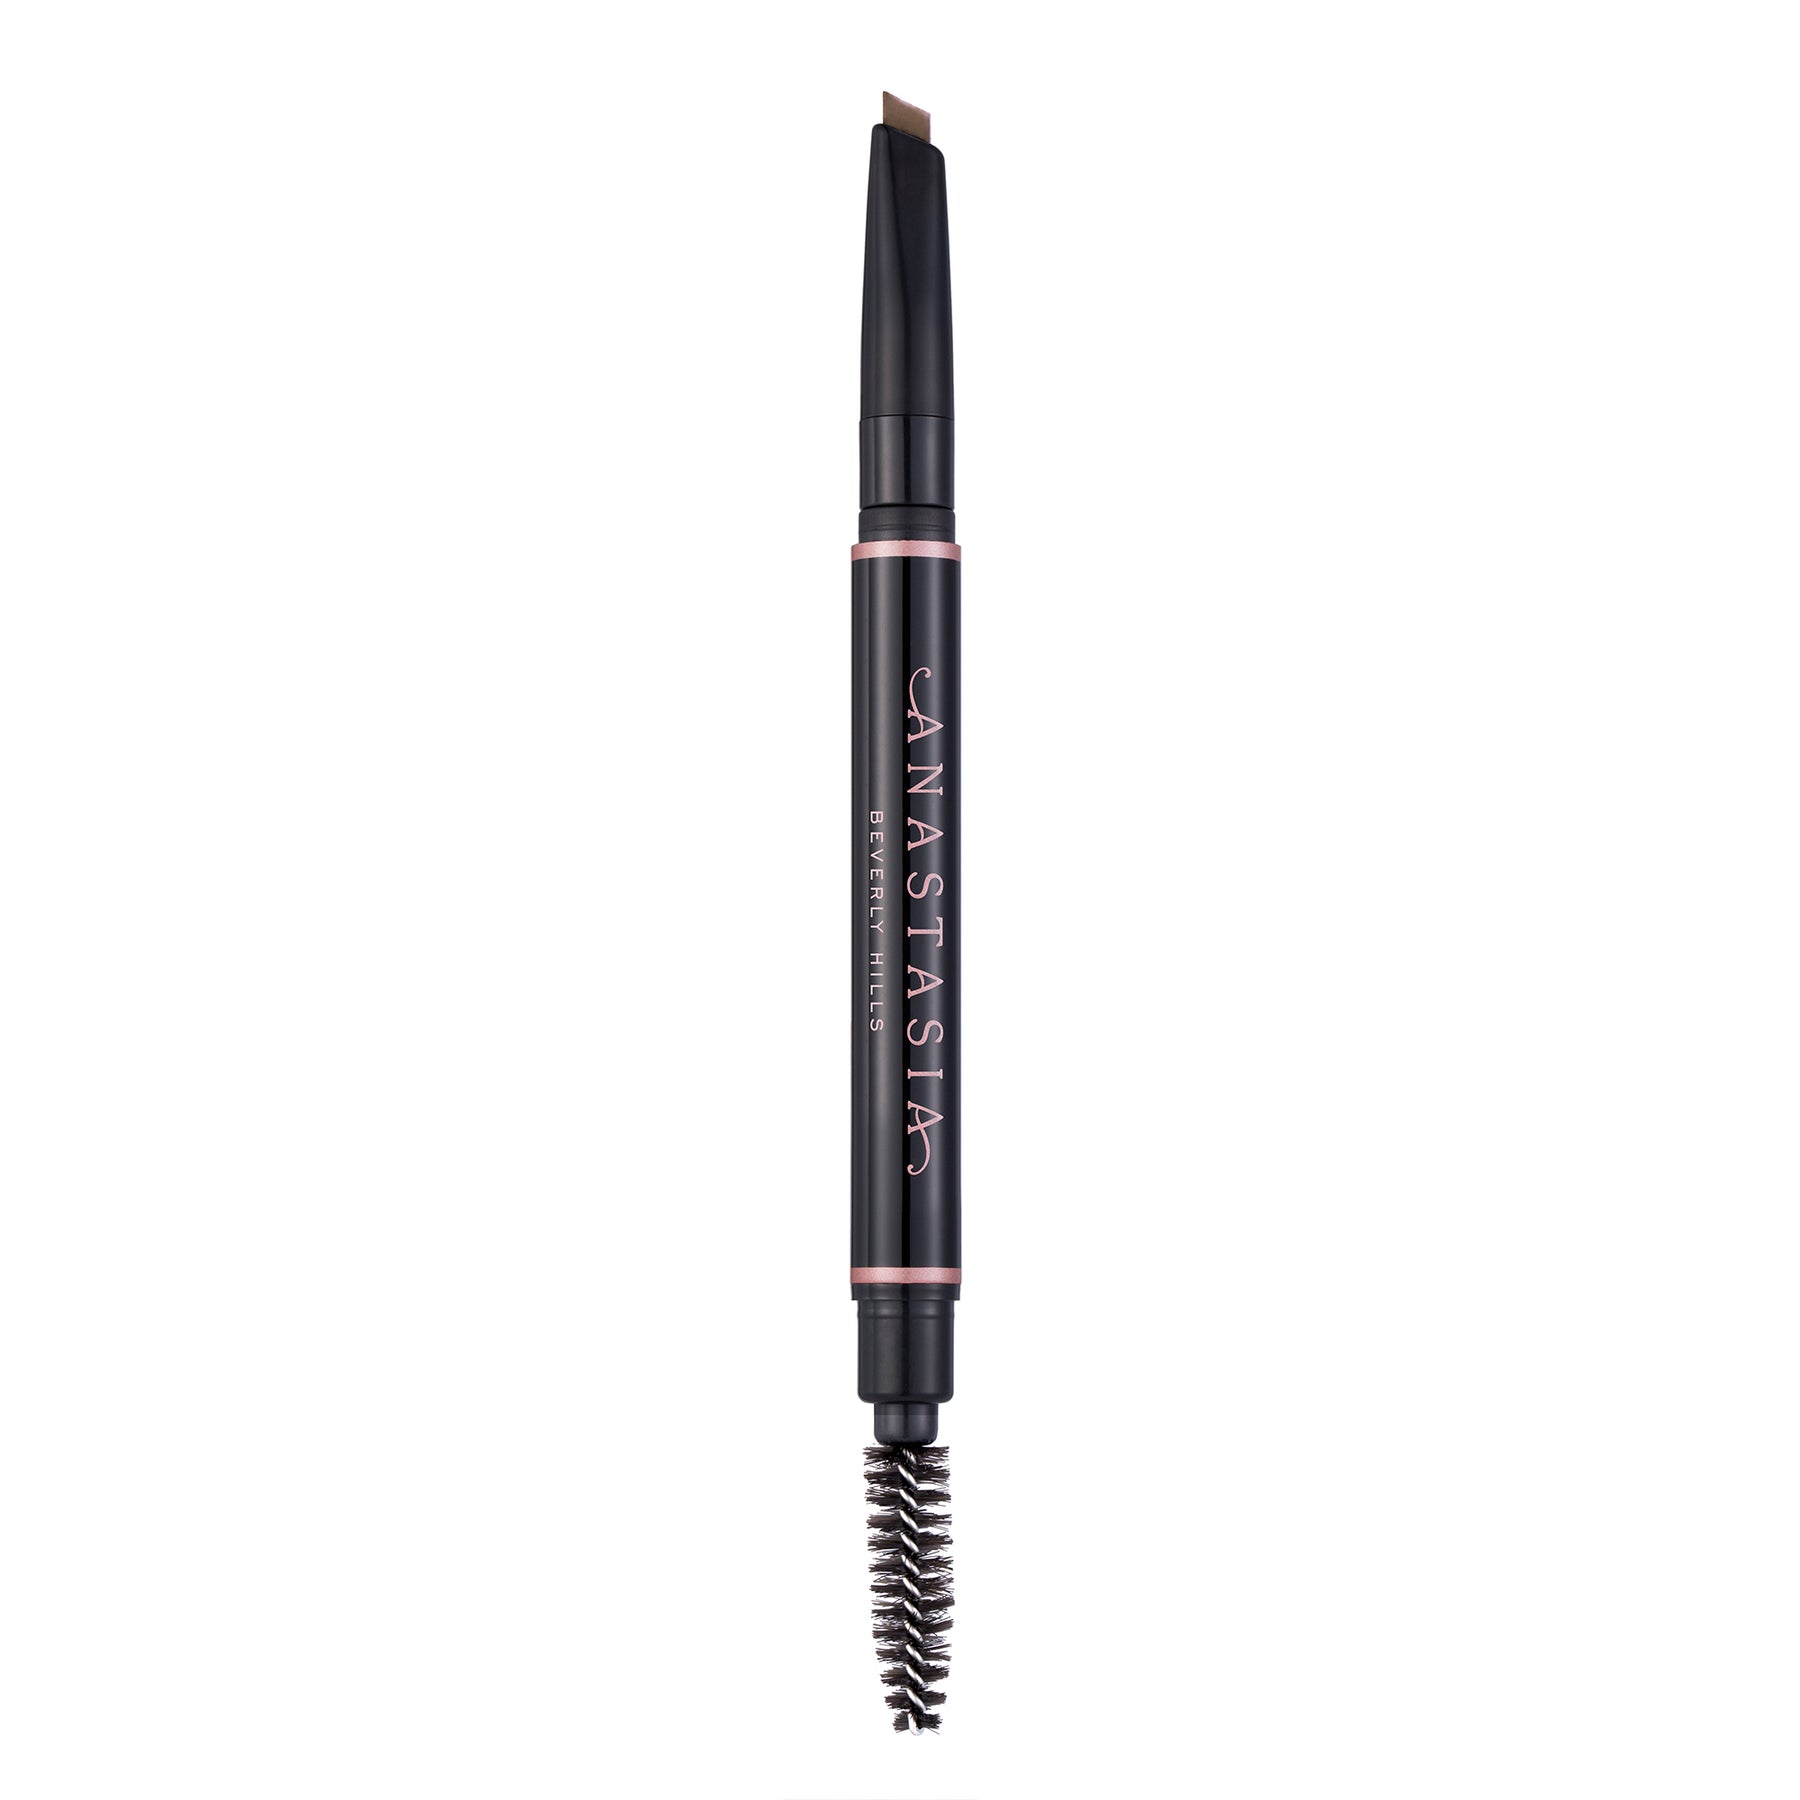 Anastasia Beverly Hills – Brow Beauty The Editor Definer